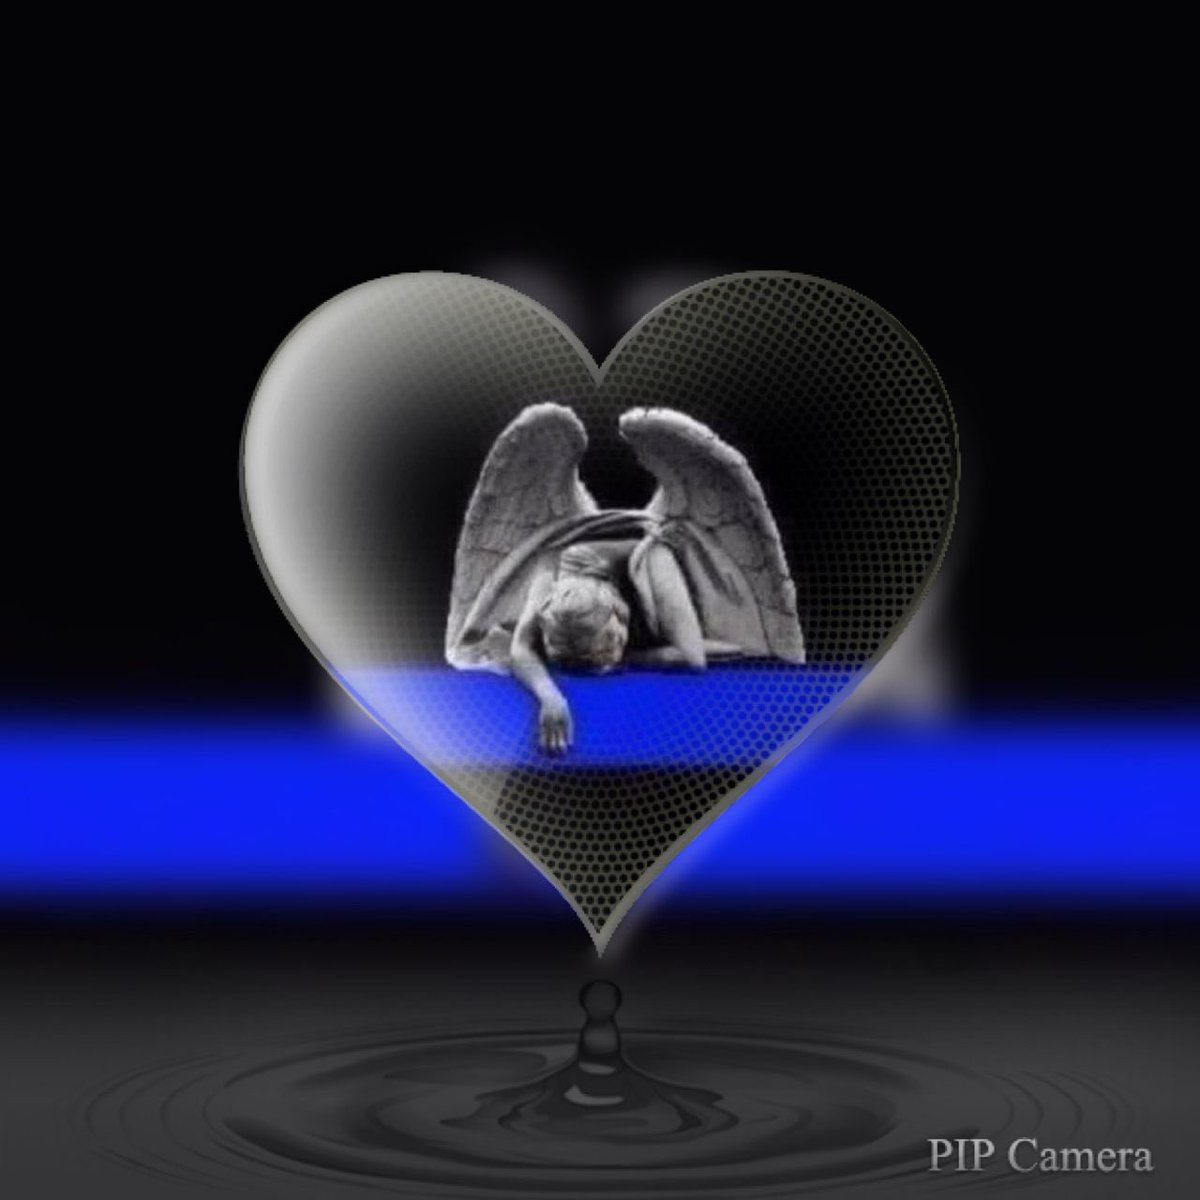 @MikeMuscutt @SgtsandersIII @FanpageLivepd @OfficialLivePD Prayers for the families 💔🙏🏼🙏🏼💙